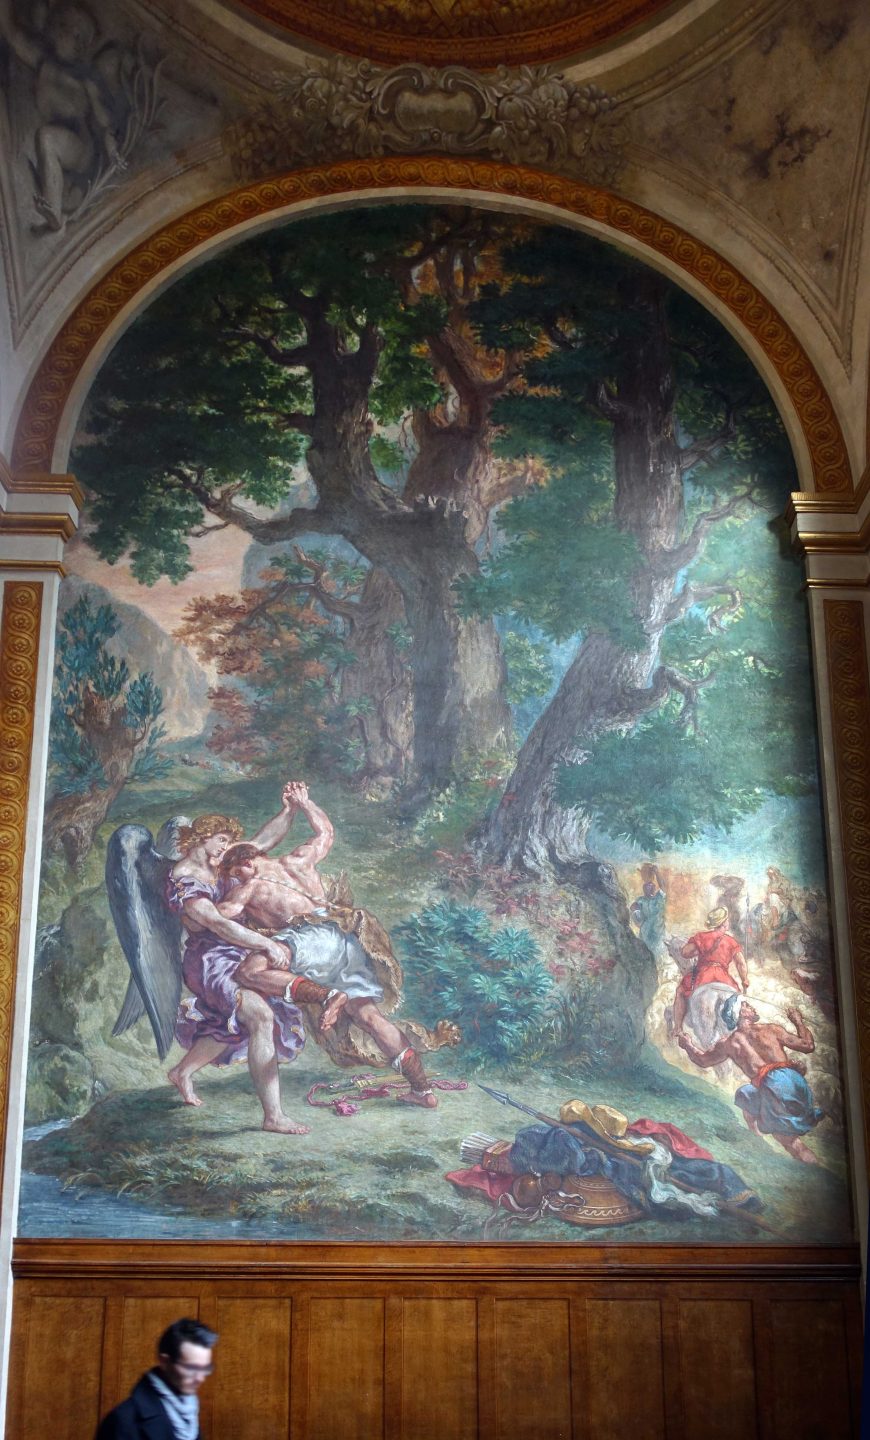 Eugène Delacroix, <i><span style="font-weight: 400;">Jacob Wrestling with the Angel</span></i>, completed 1861, mural in the Chapel of the Holy Angels, Church of Saint-Sulpice, Paris (photo: Dr. Steven Zucker)